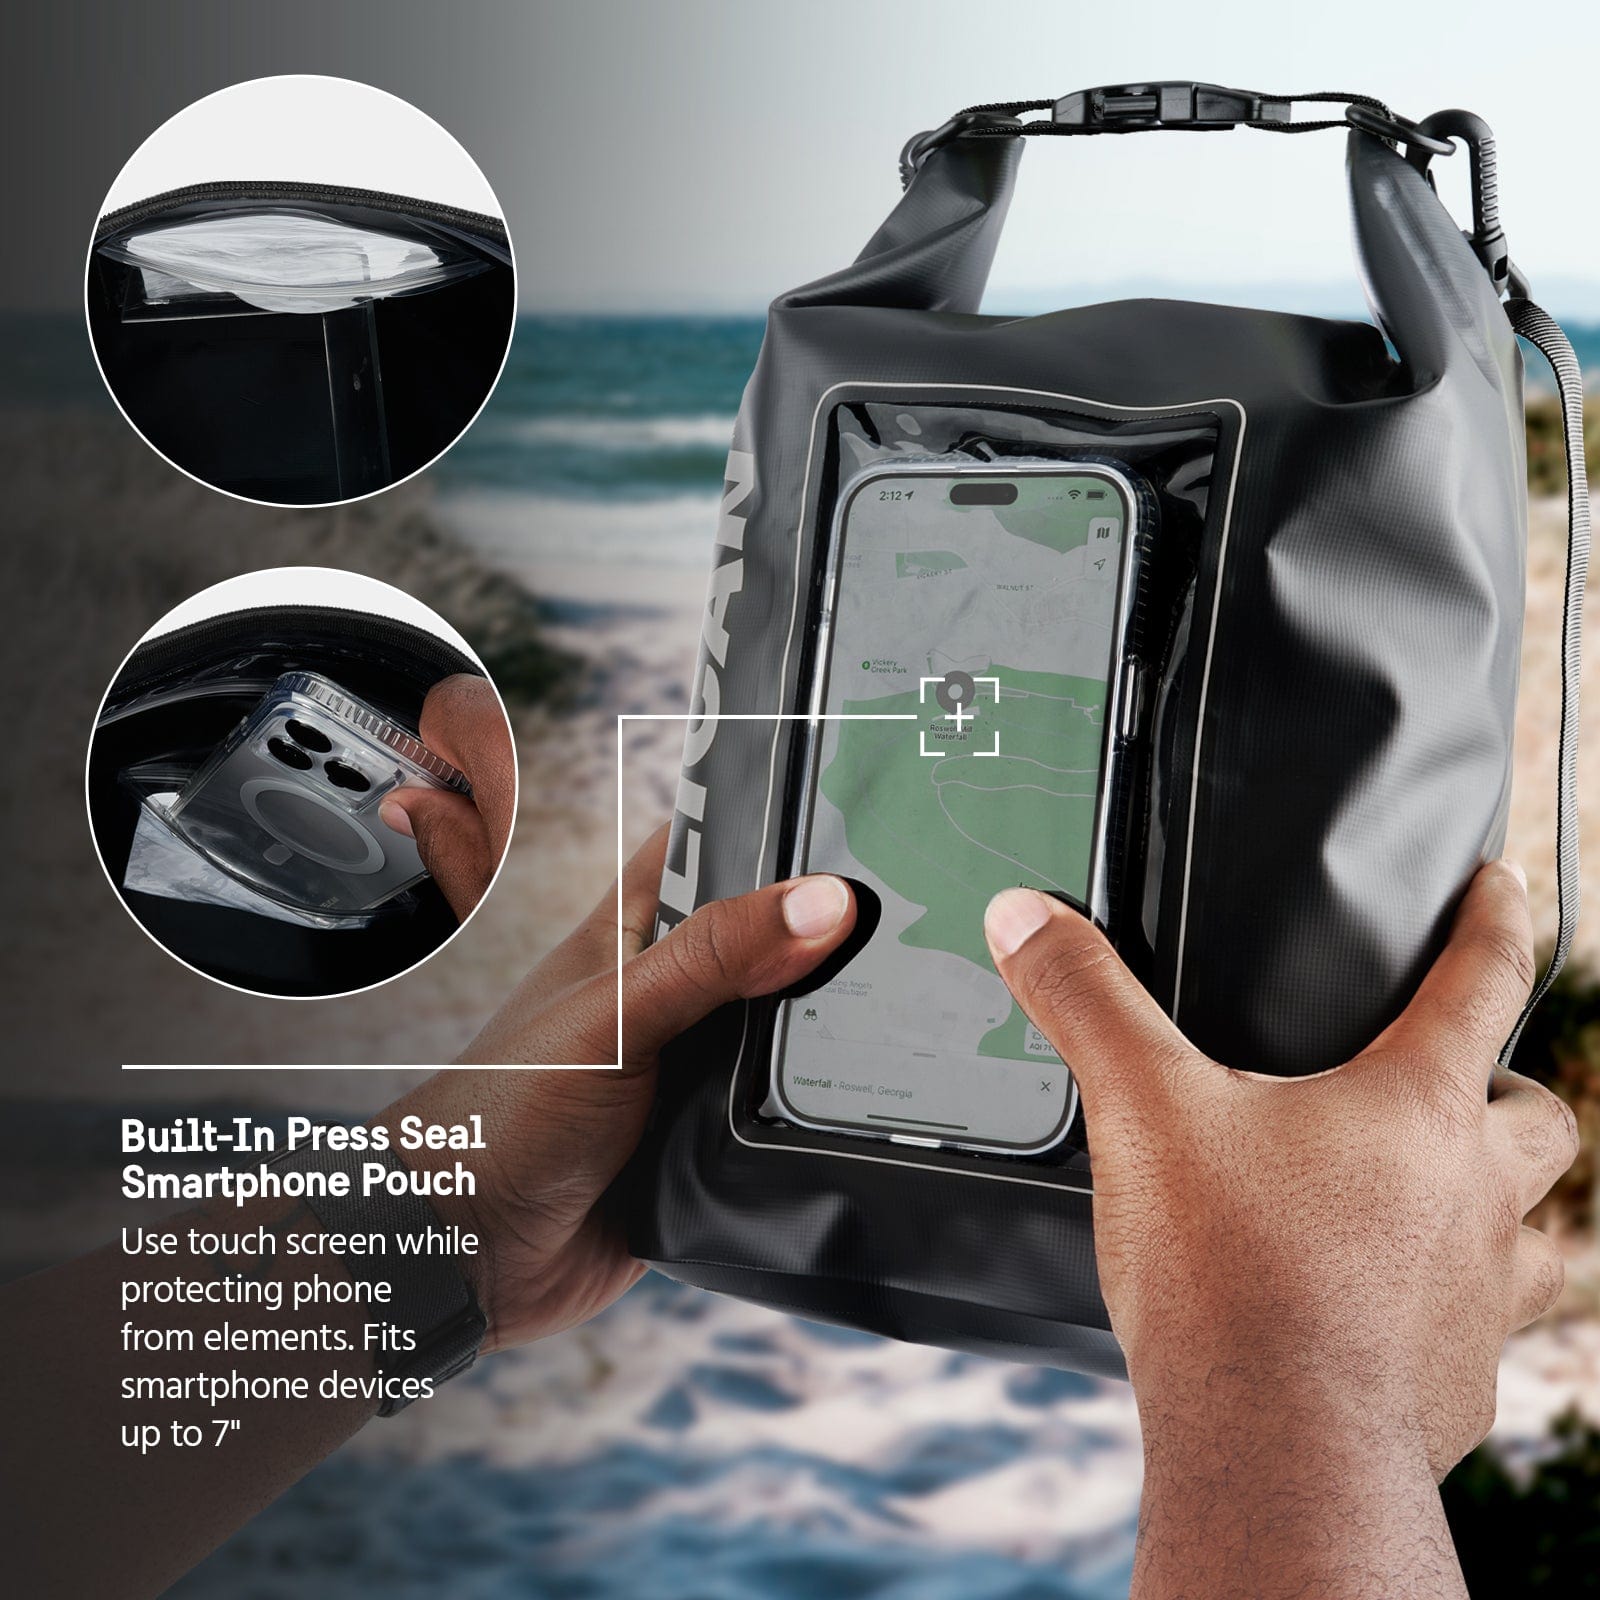 Built in Press Seal Smartphone Pouch. Use touch screen while protecting phone from elements. Fits smartphone devices up to 7"